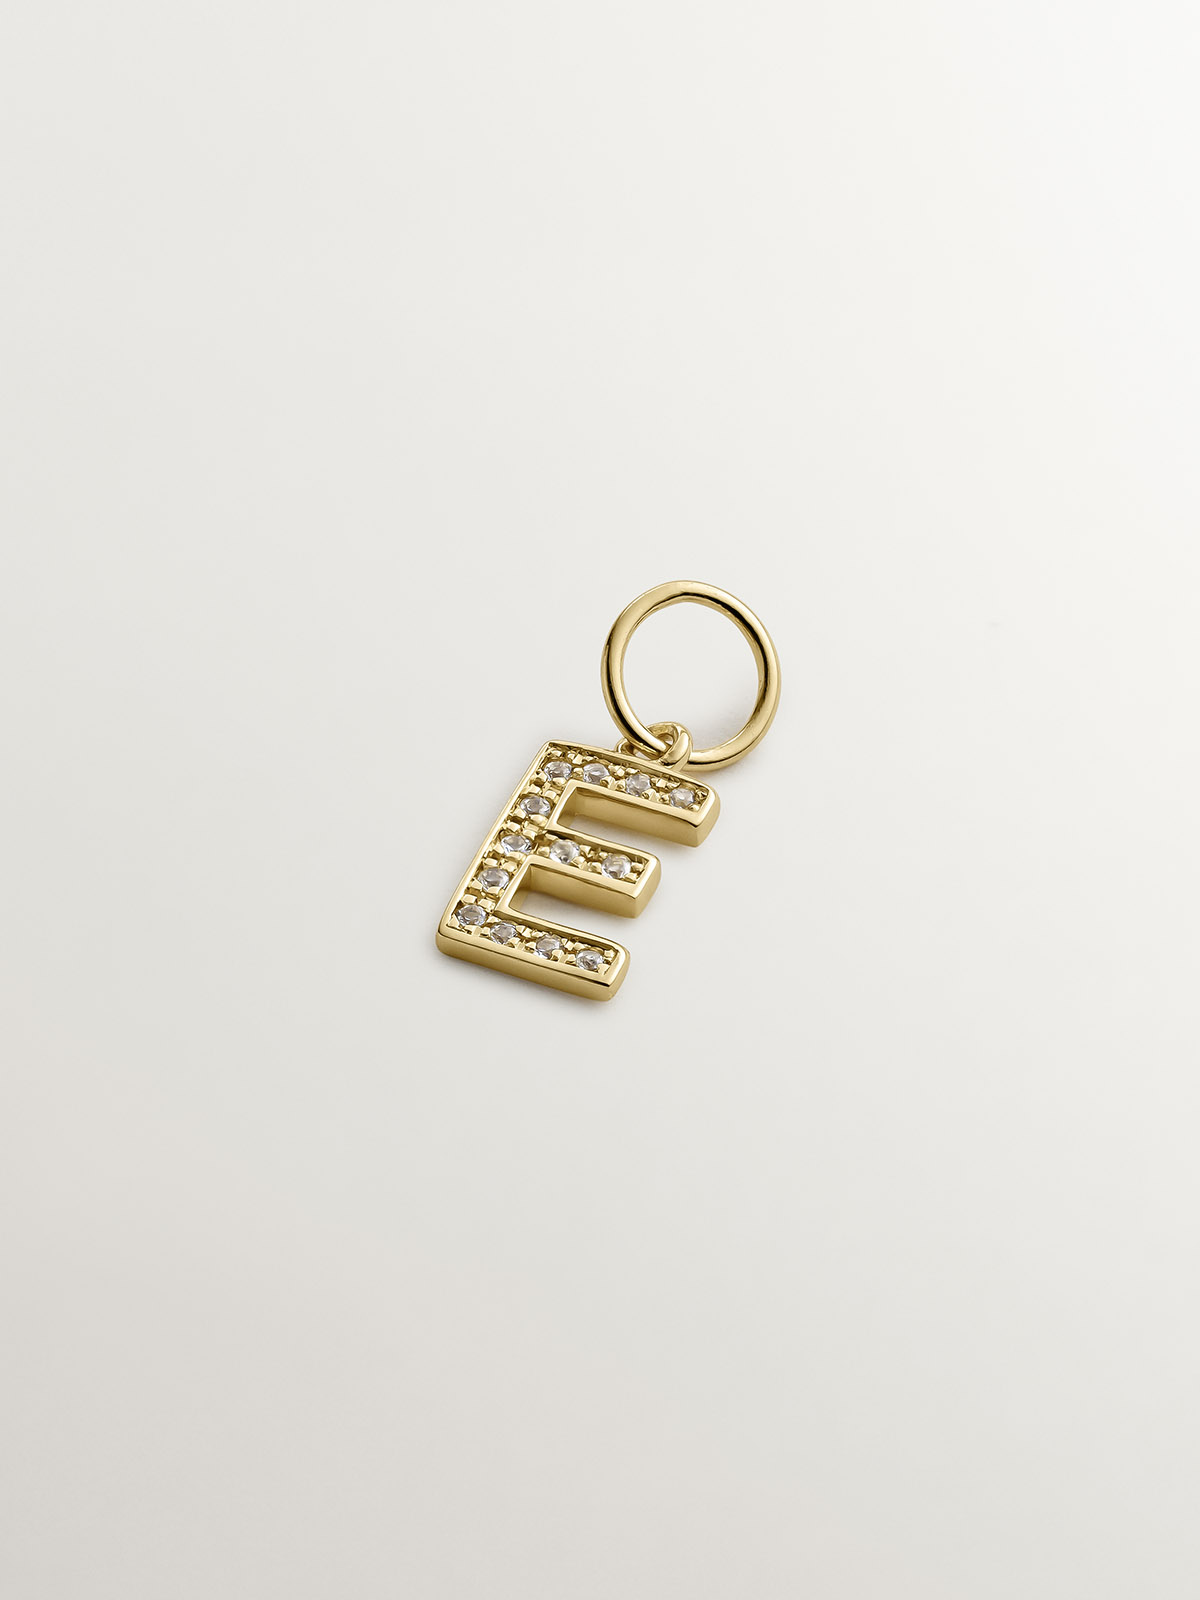 18K yellow gold-plated 925 silver charm with white topaz, initial E.